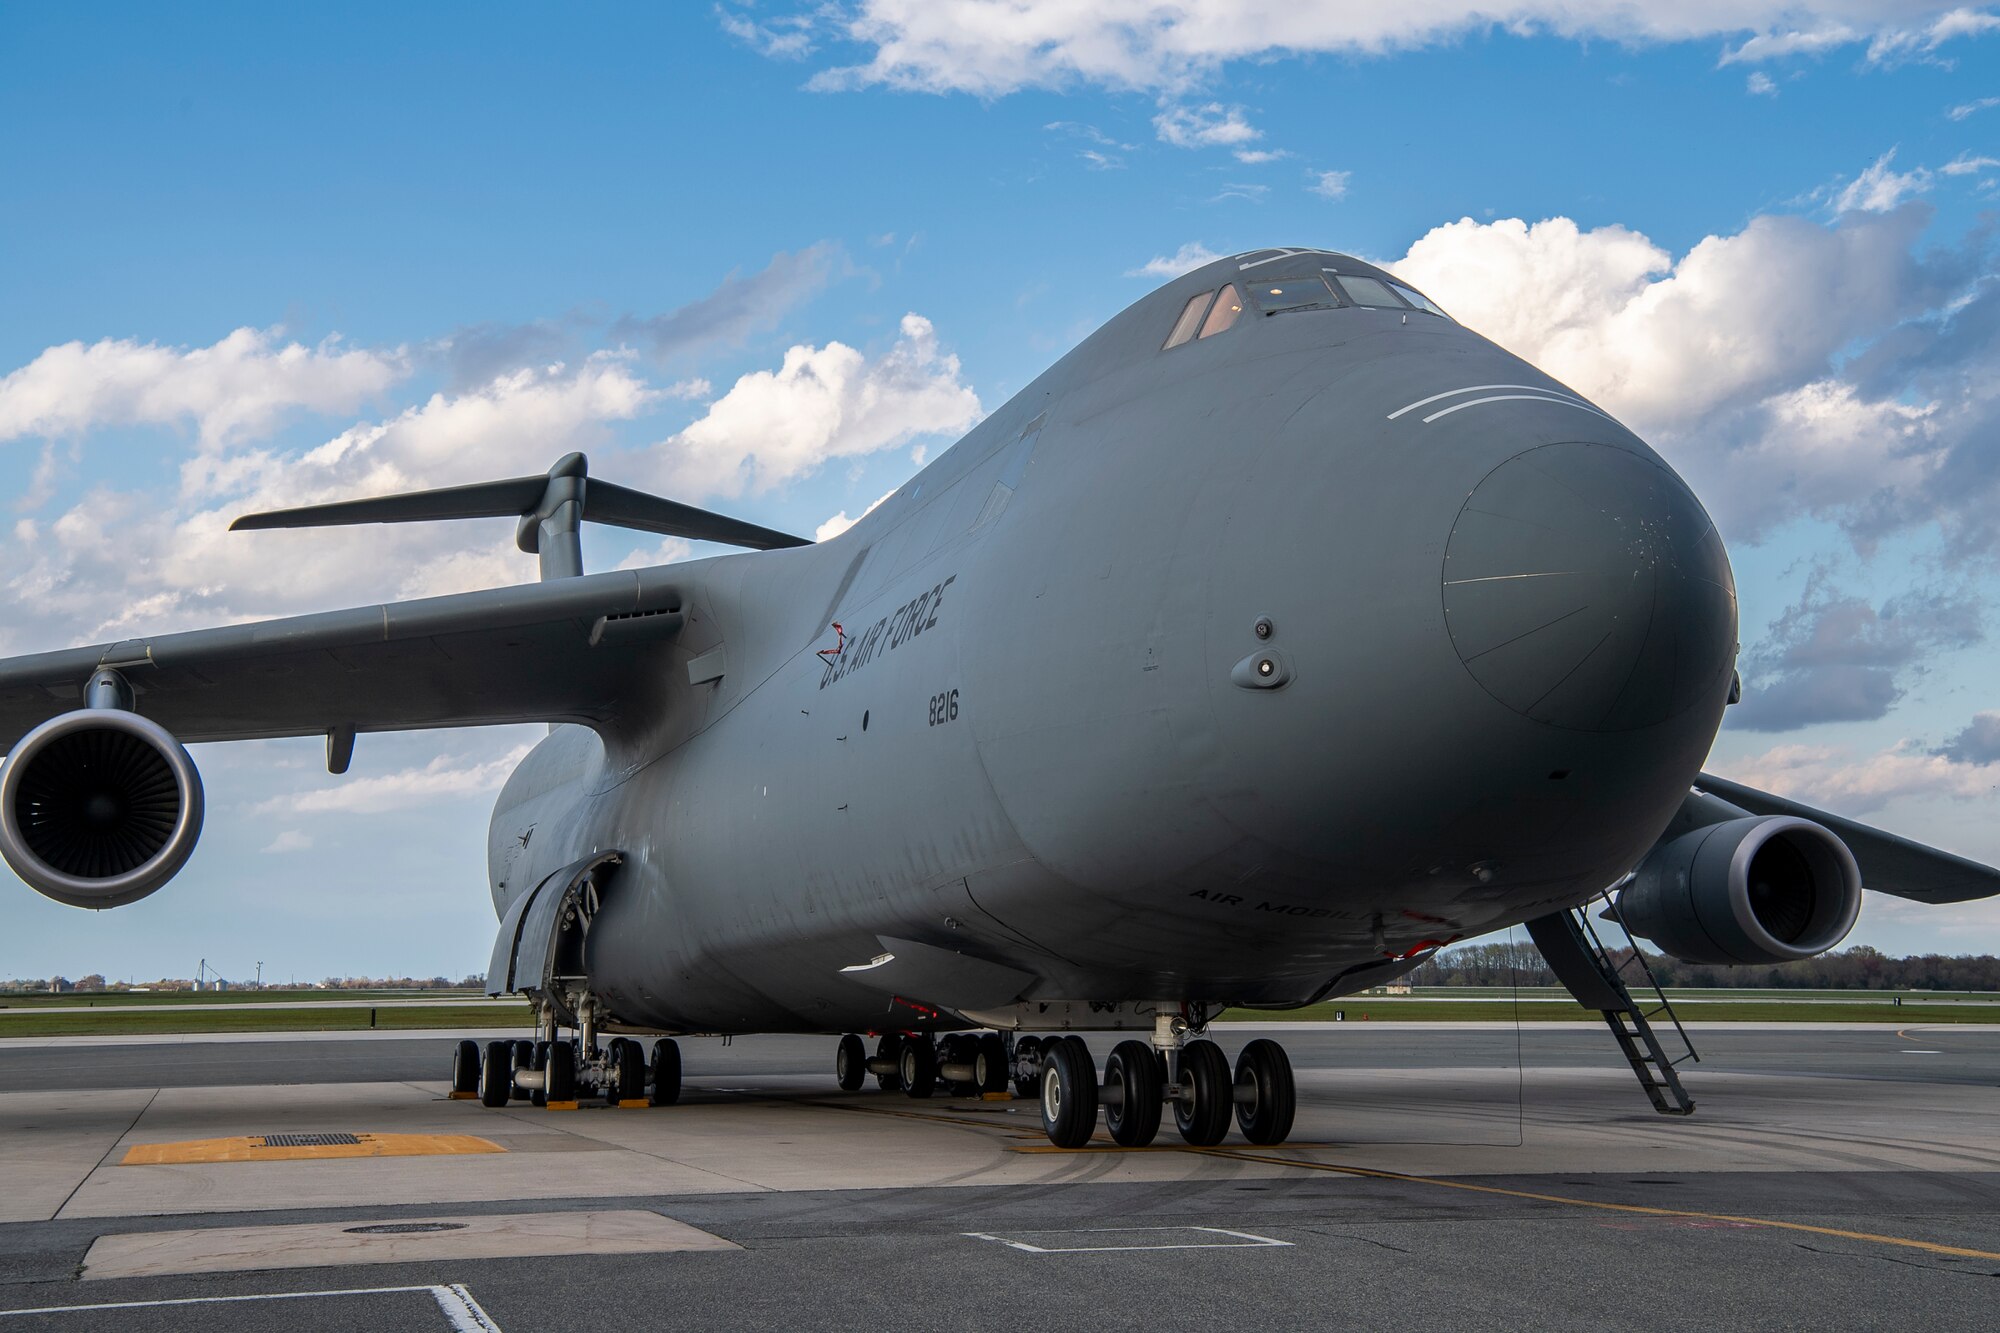 A C-5C Space Cargo Modified Galaxy from Travis Air Force Base, California, is parked on the flight line at Dover AFB, Delaware, April 8, 2020. The C-5C SCM has the troop compartment removed and a modification to the rear loading doors. It is specially modified to carry satellites and other large cargo. (U.S. Air Force photo by Senior Airman Christopher Quail)